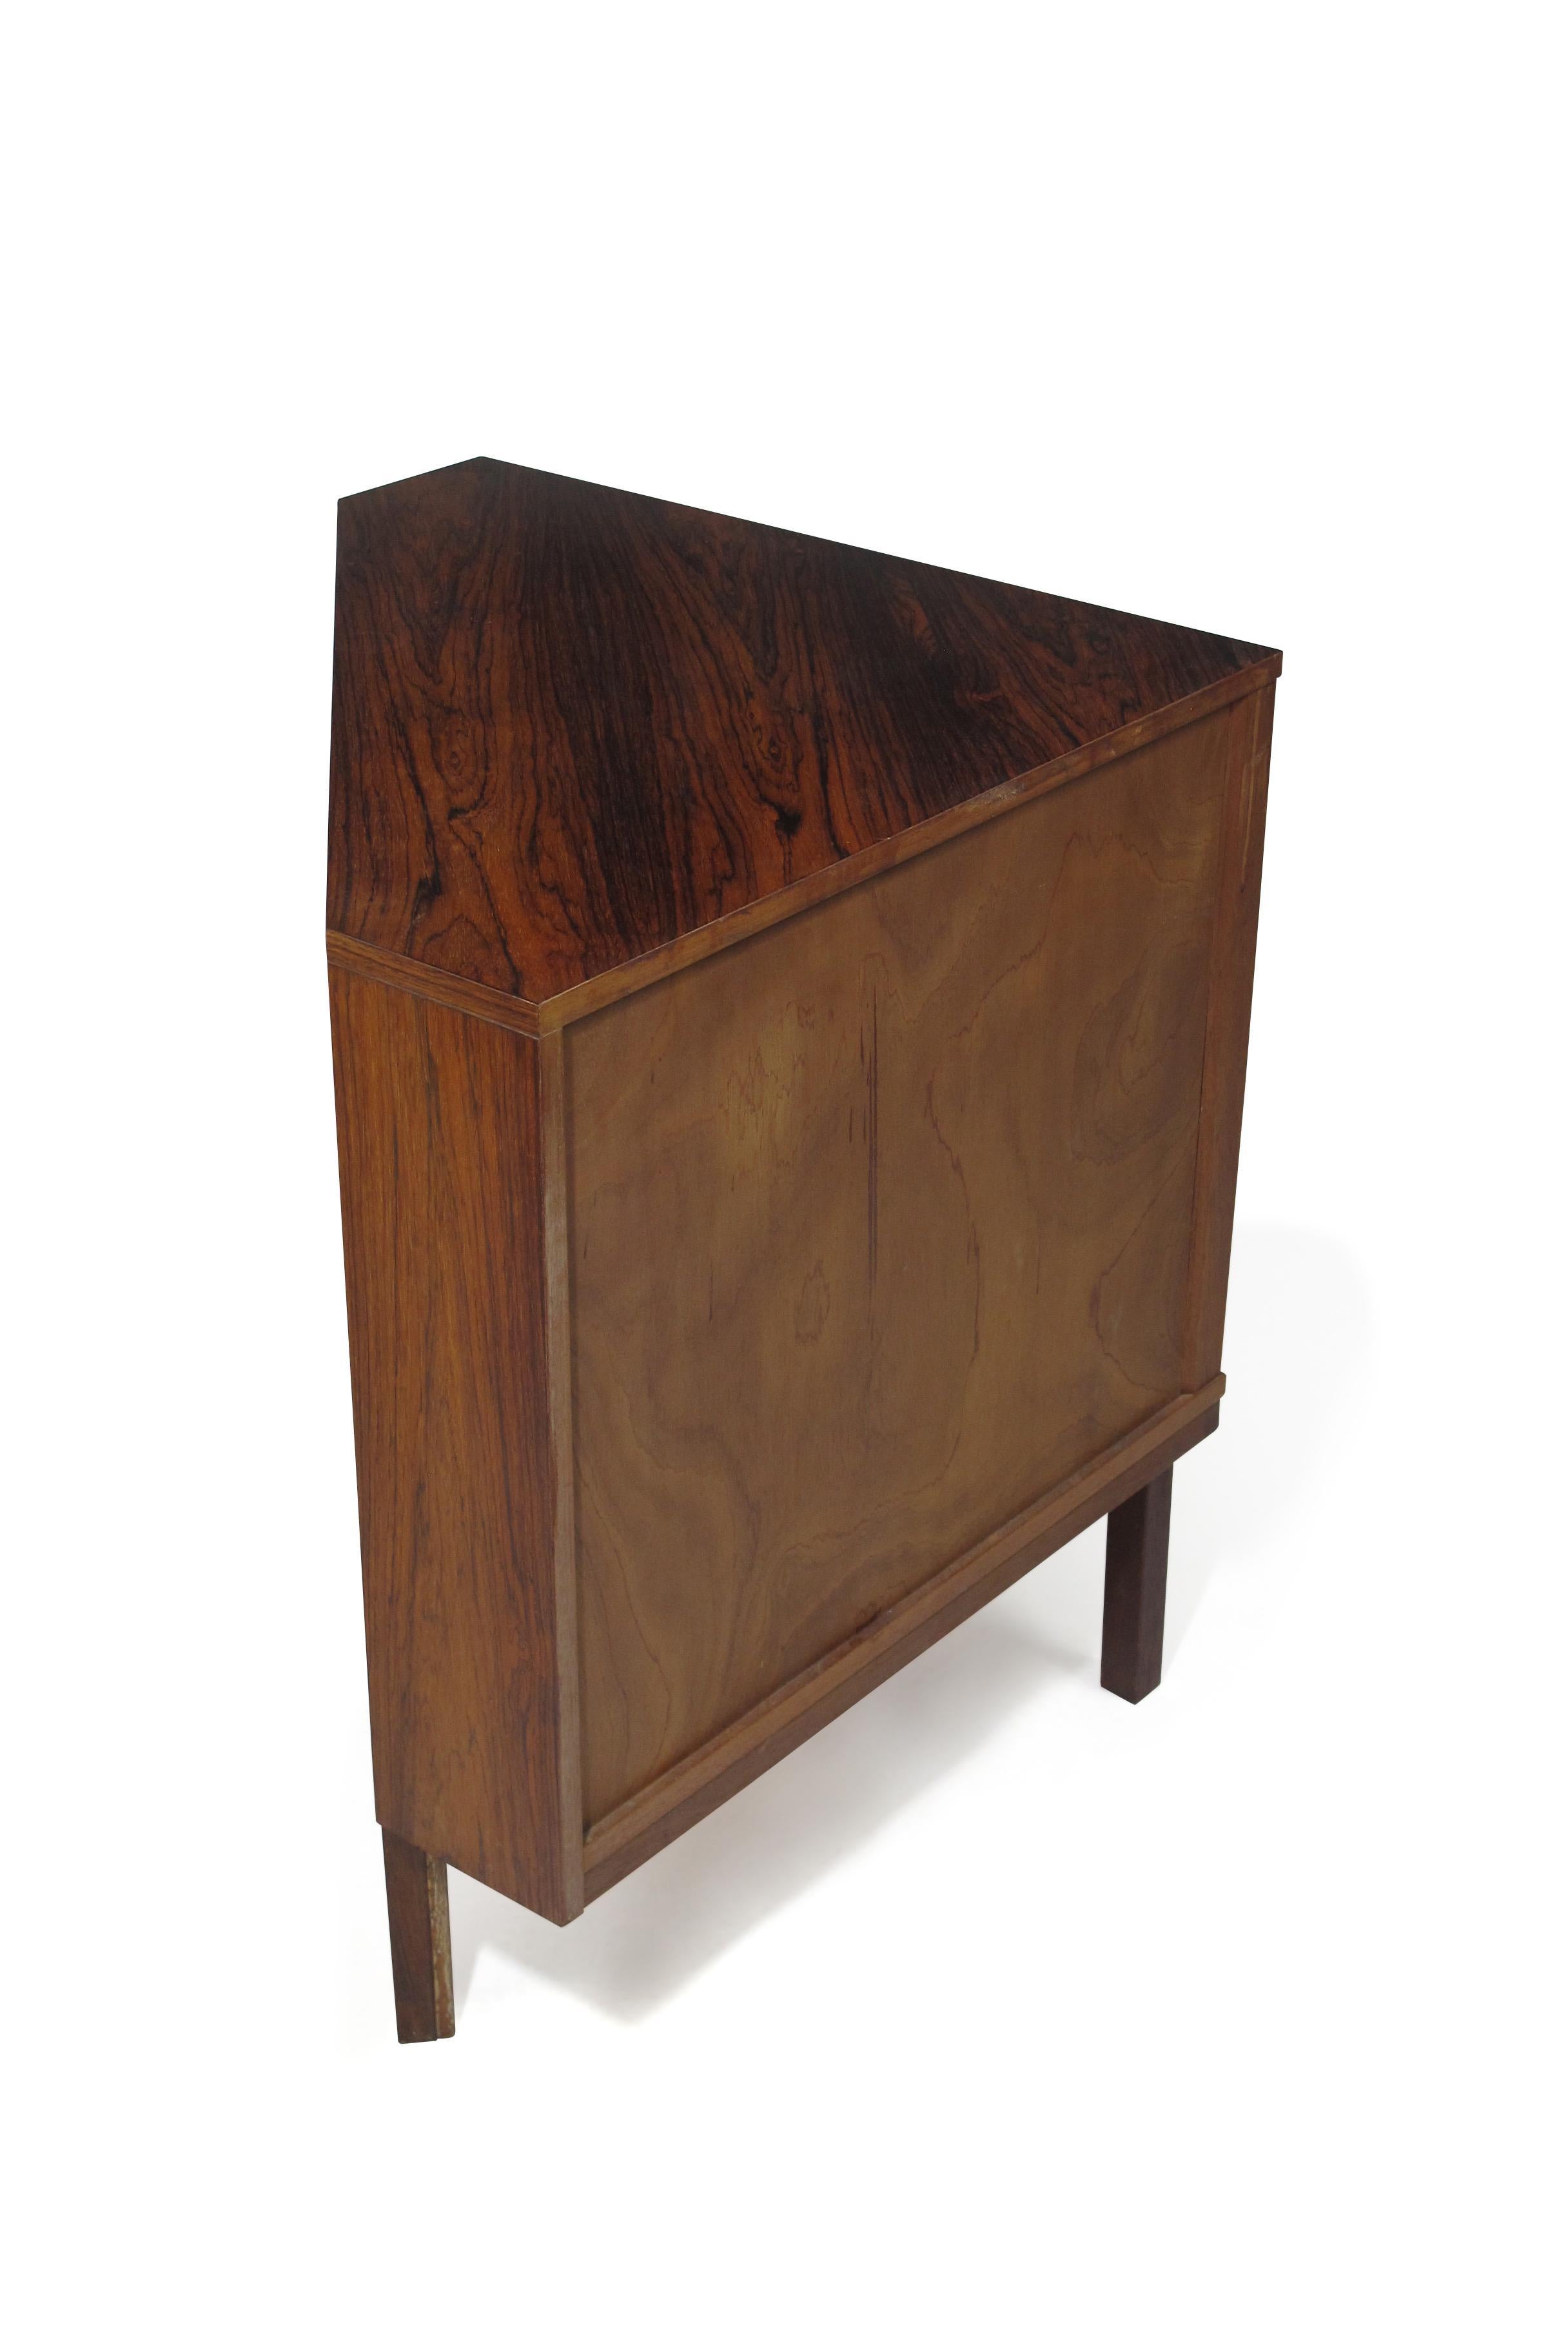 Danish Rosewood Low Corner Cabinet In Good Condition For Sale In Oakland, CA